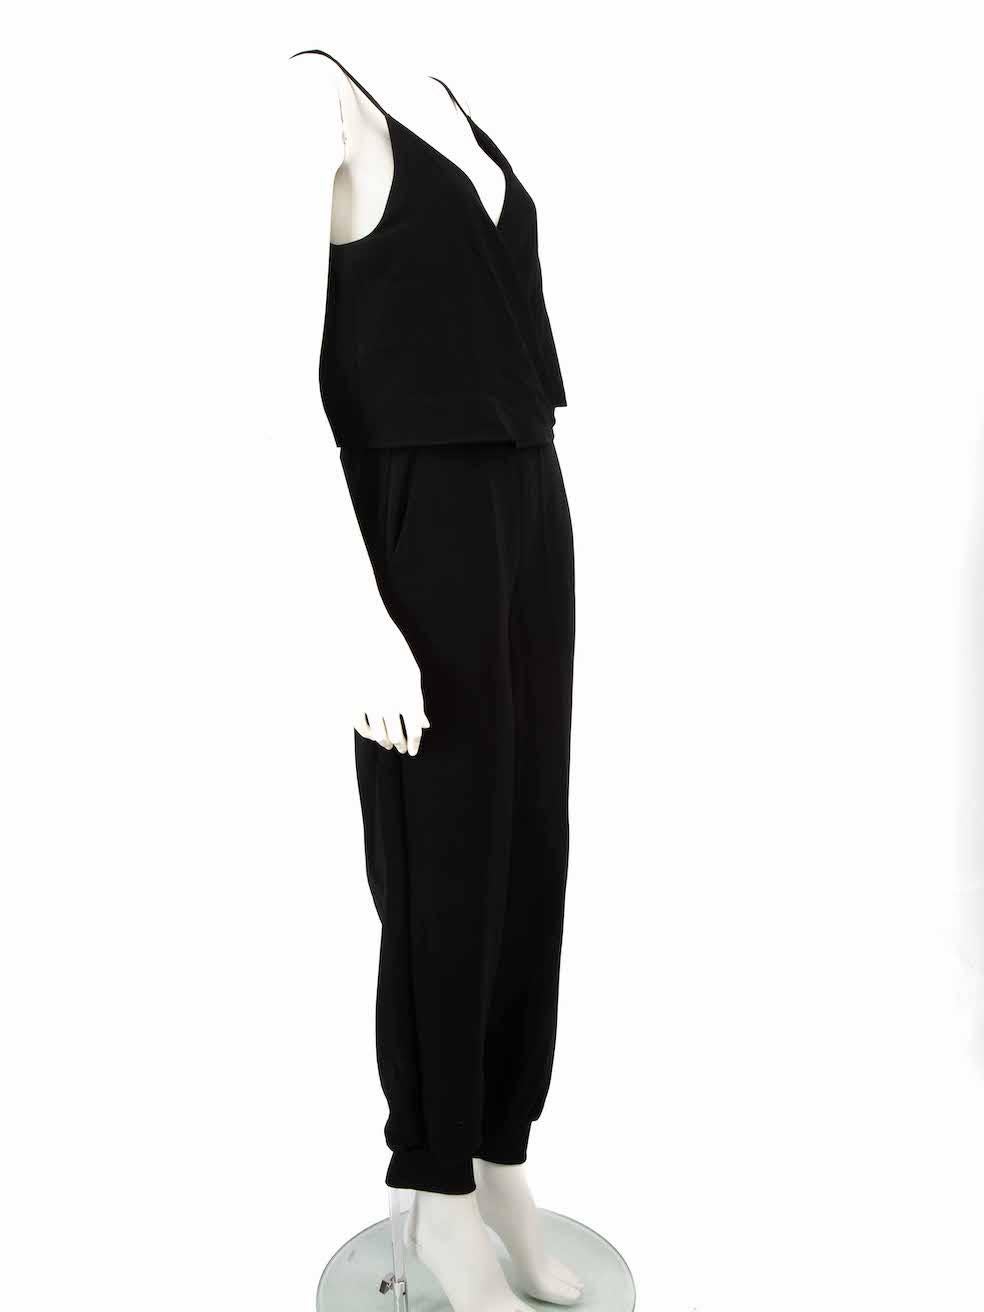 CONDITION is Never worn, with tags. No visible wear to jumpsuit is evident on this new Theory designer resale item.
 
 
 
 Details
 
 
 Black
 
 Synthetic
 
 Jumpsuit
 
 Sleeveless
 
 Plunge neck
 
 Ribbed cuffs
 
 Button fastening
 
 2x Back